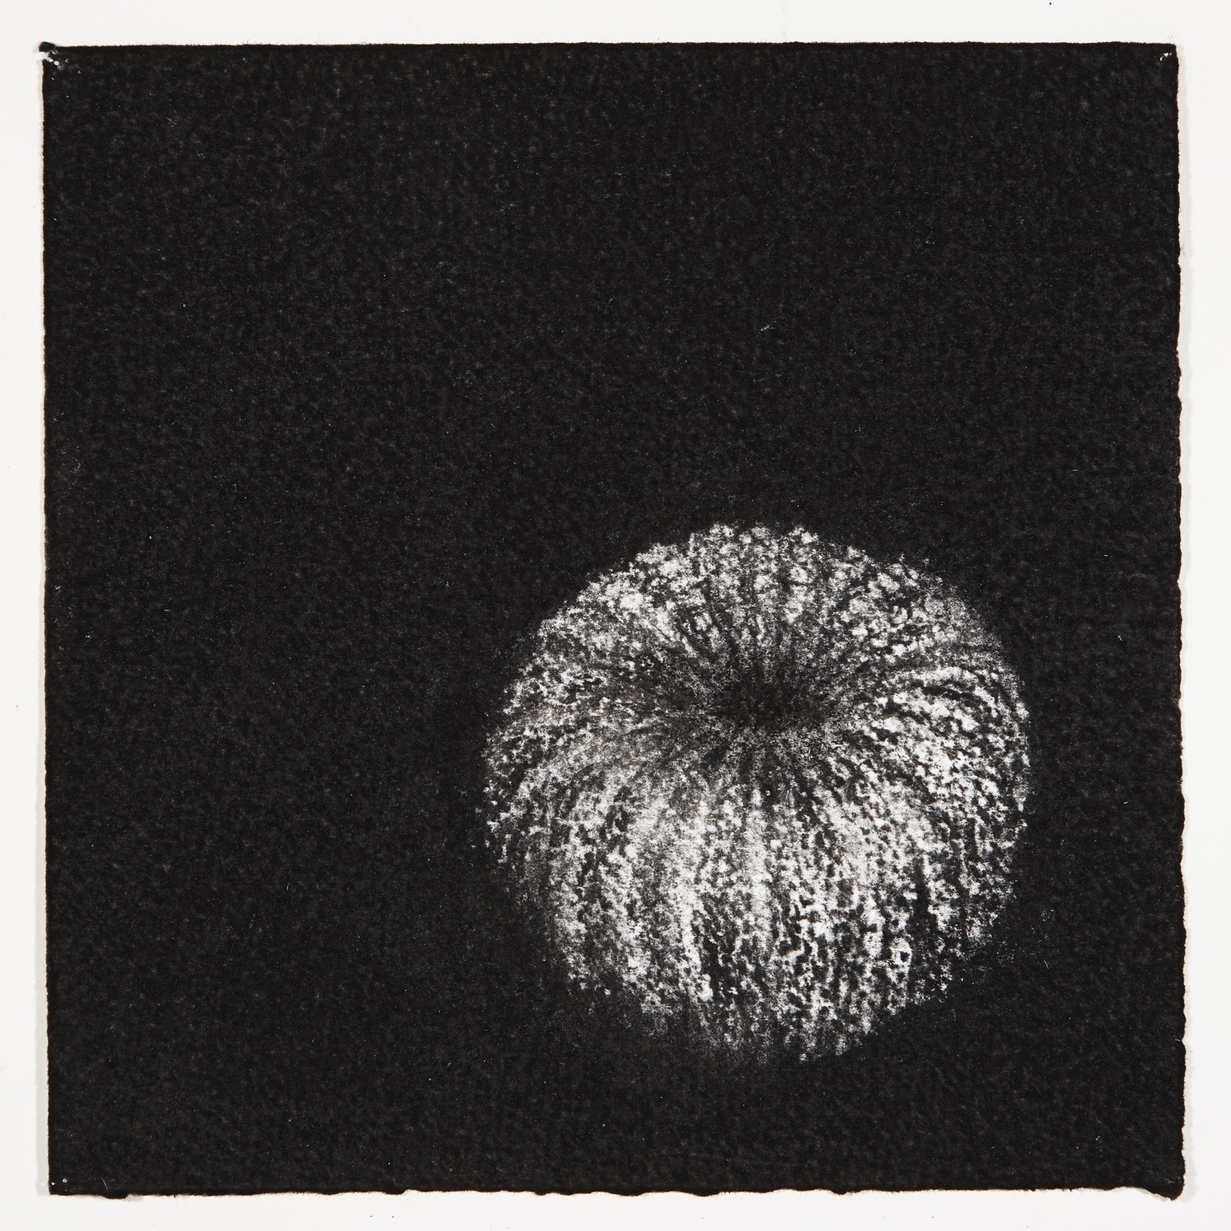  Urchin, 2014, charcoal on paper, 18x18cm 